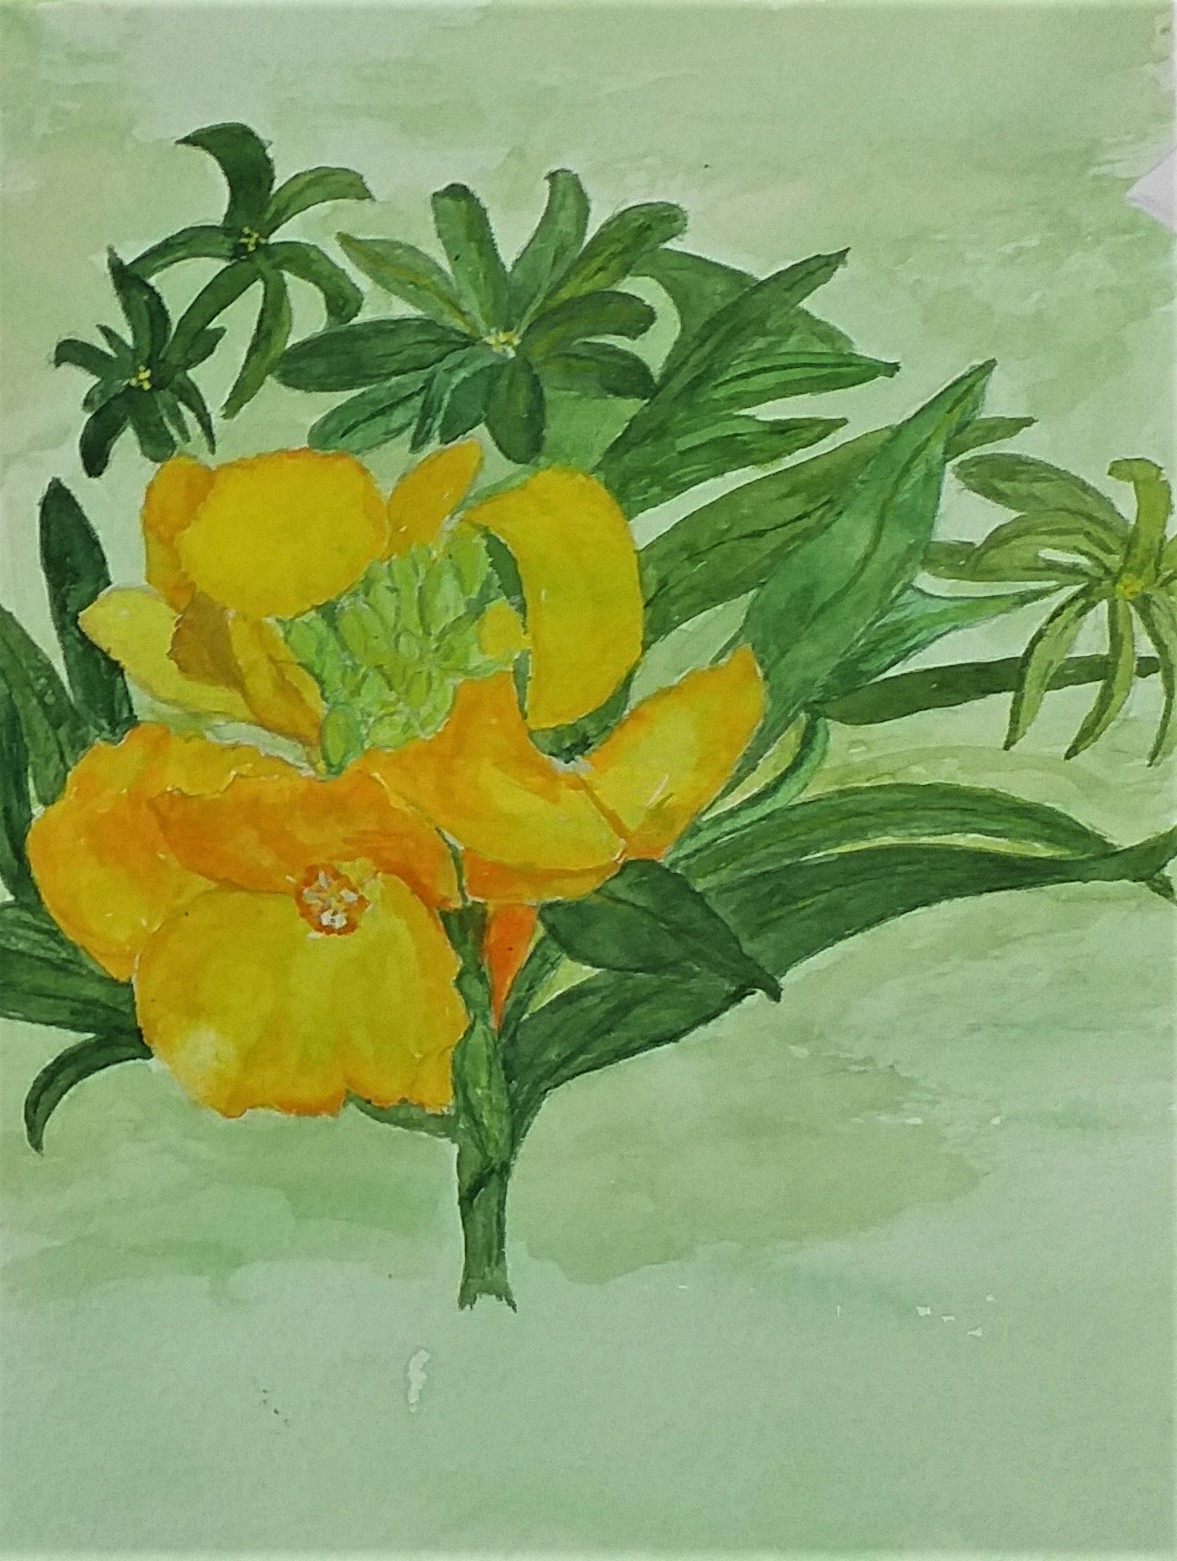 Watercolour studies of plants produced by complete beginners at Magic Wool Art and Craft Studio